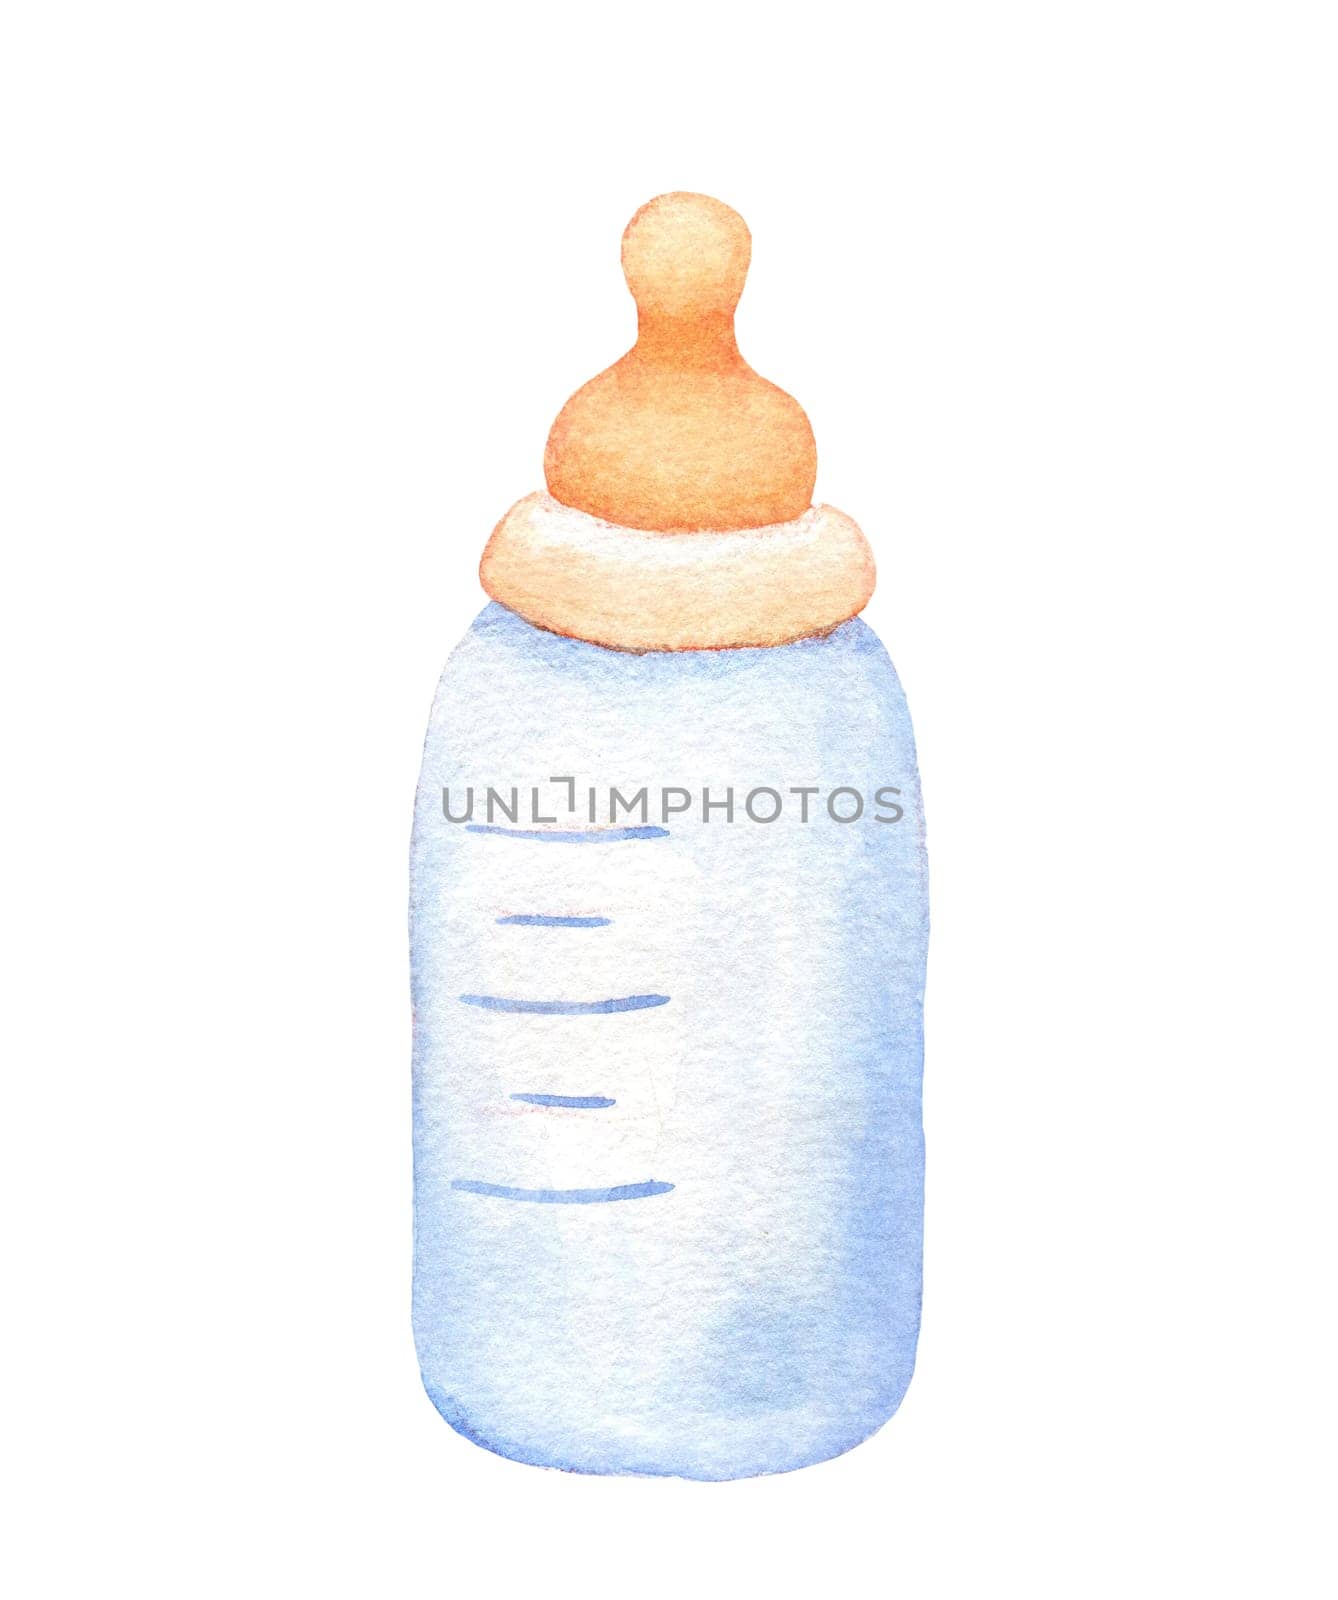 Watercolor baby milk bottle illustration isolated on white. Hand painted sketch